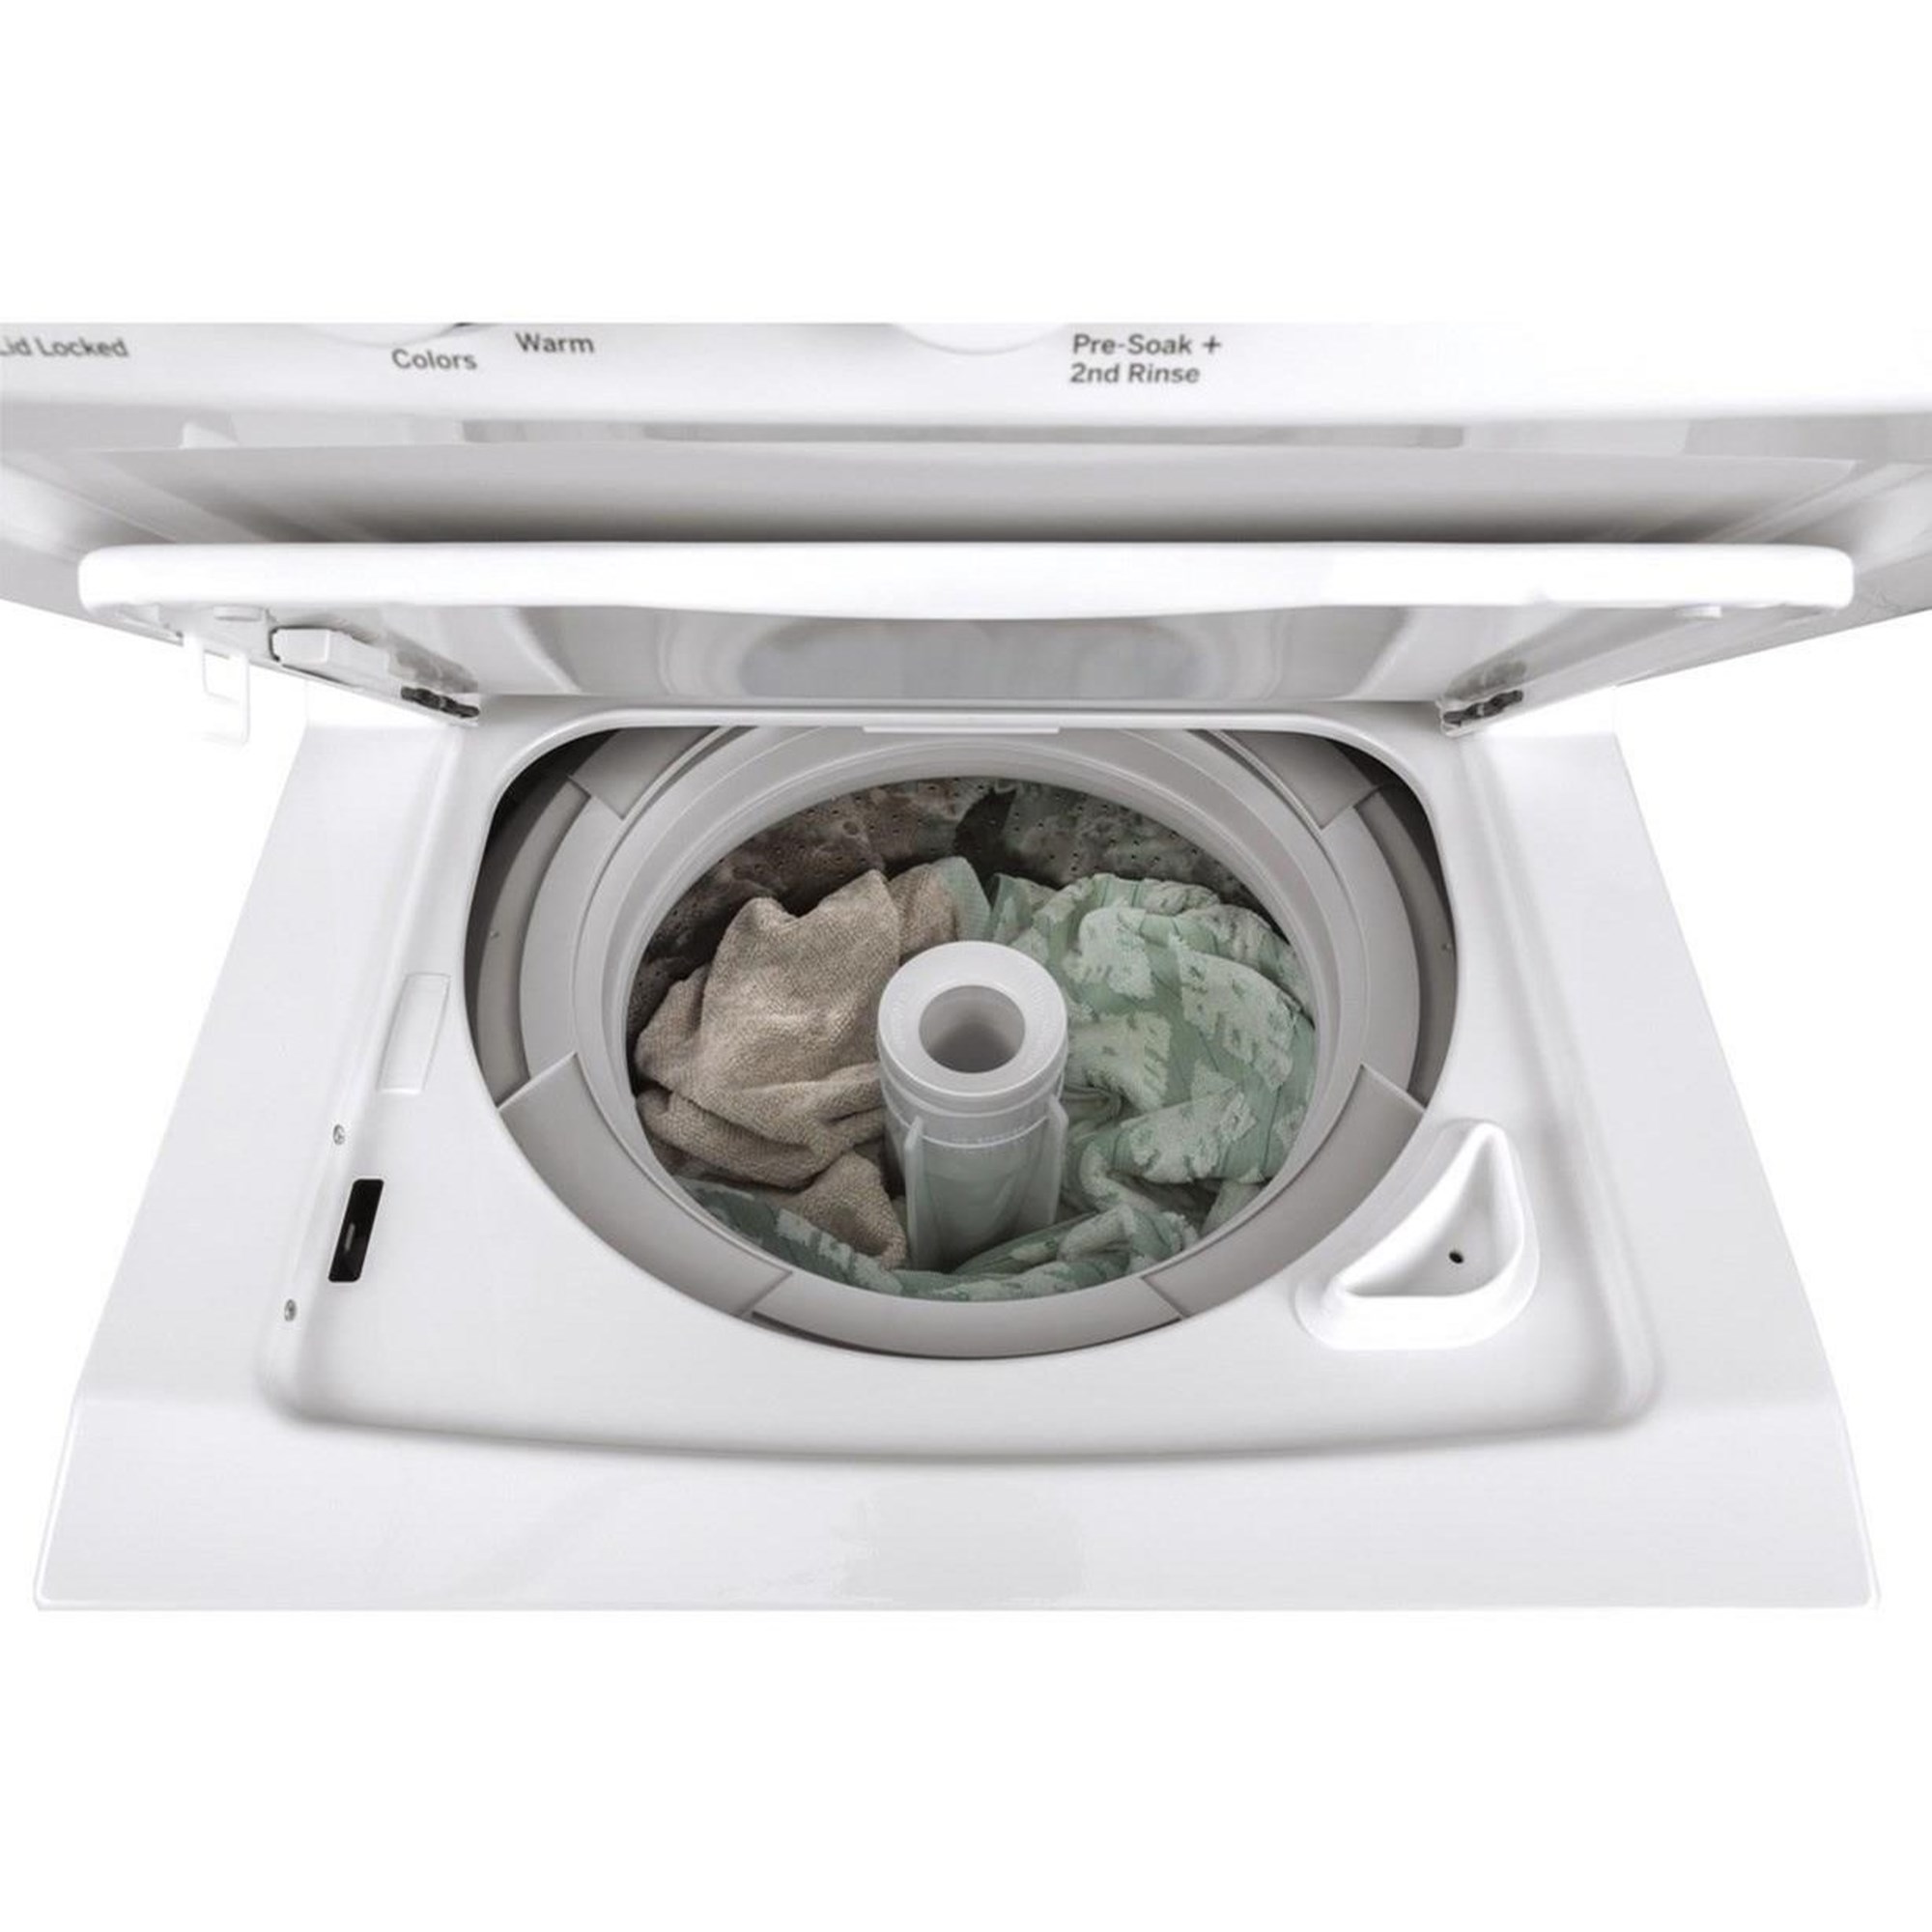 GNW128PSMWW GE Space-Saving 2.8 cu. ft. Capacity Portable Washer